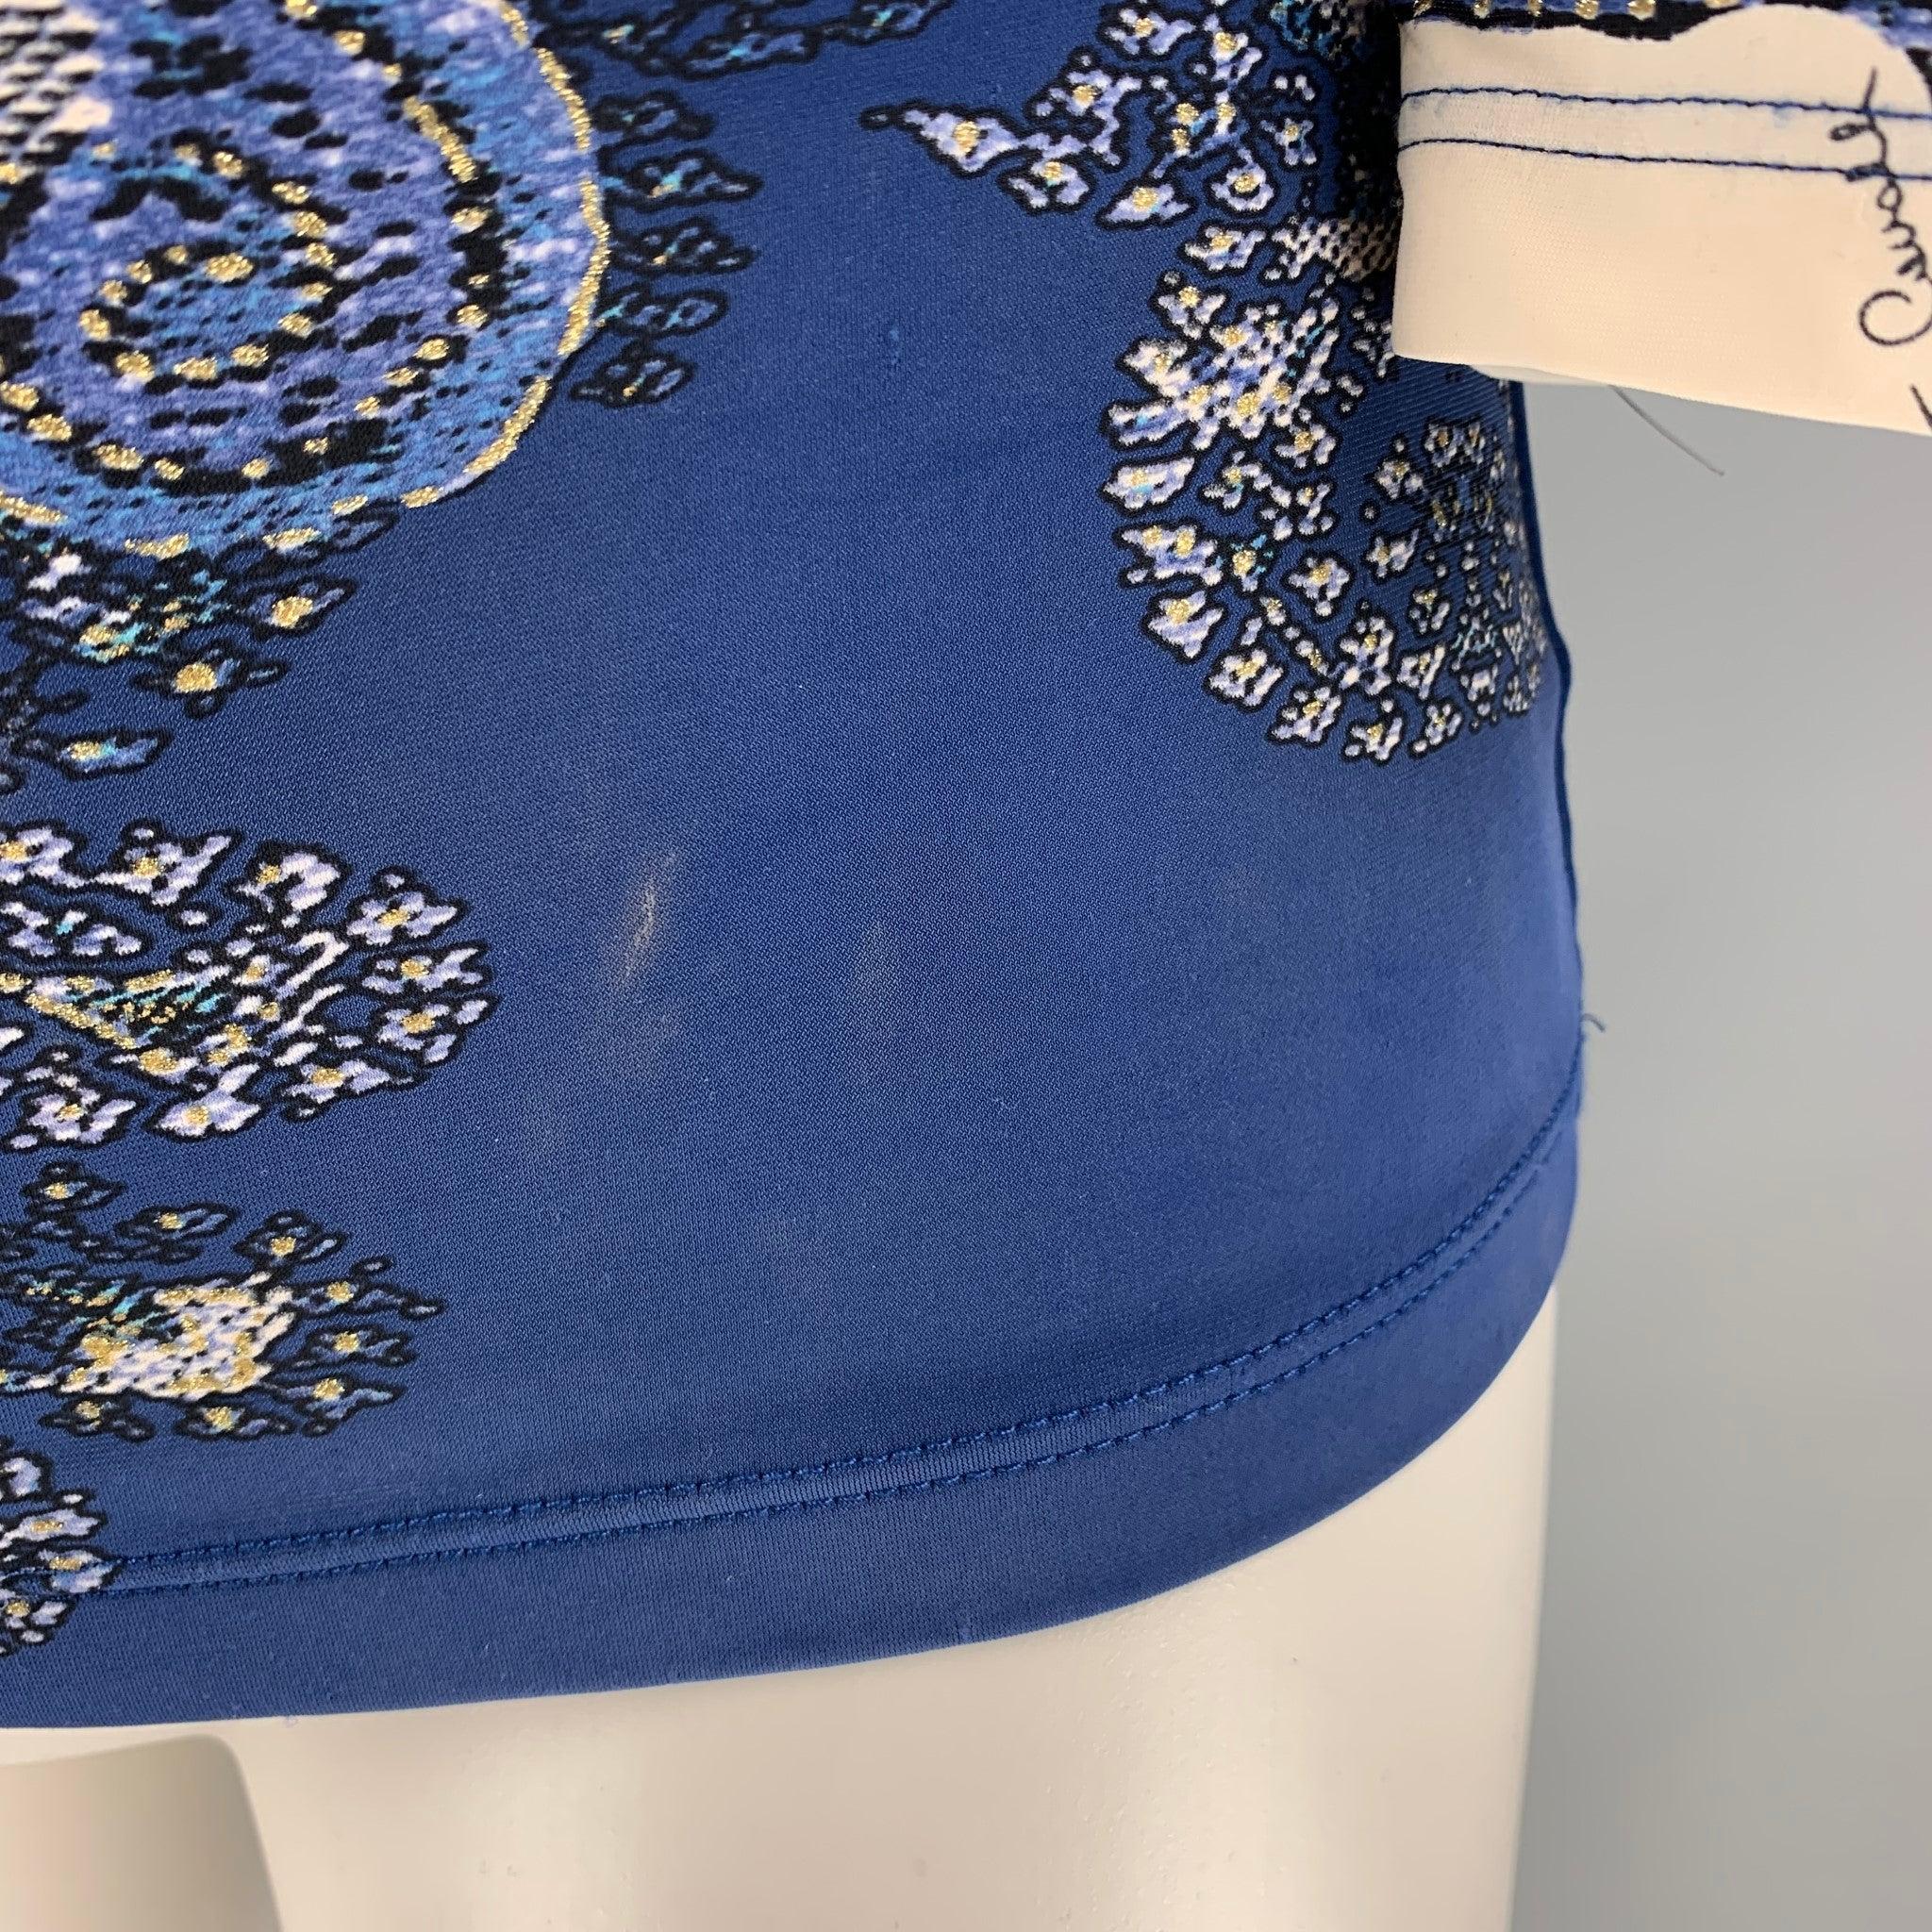 ROBERTO CAVALLI blouse comes in blue and white paisley print fabric featuring draped neckline.Good Pre-Owned Condition.
Fabric Tag Removed and marks at bottom front and left side seam. 

Marked:   Size Tag Removed. 

Measurements: 
 
Shoulder: 17